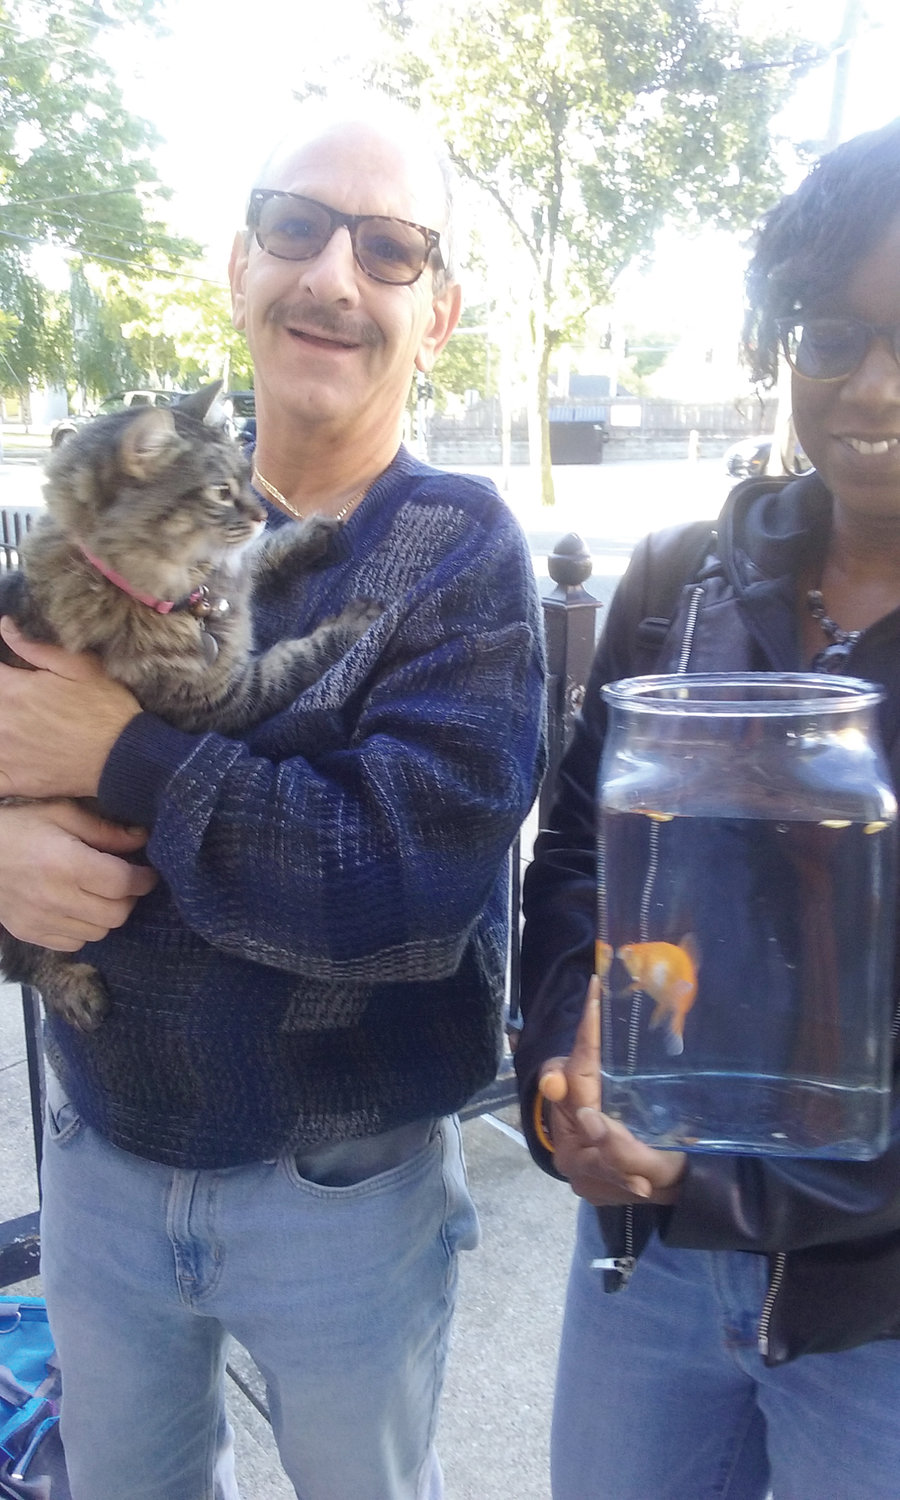 For the first time, St. Ann’s Church, Providence, welcomed a fish for a special blessing at their annual event, as well as may other pets on Saturday, Oct. 5.